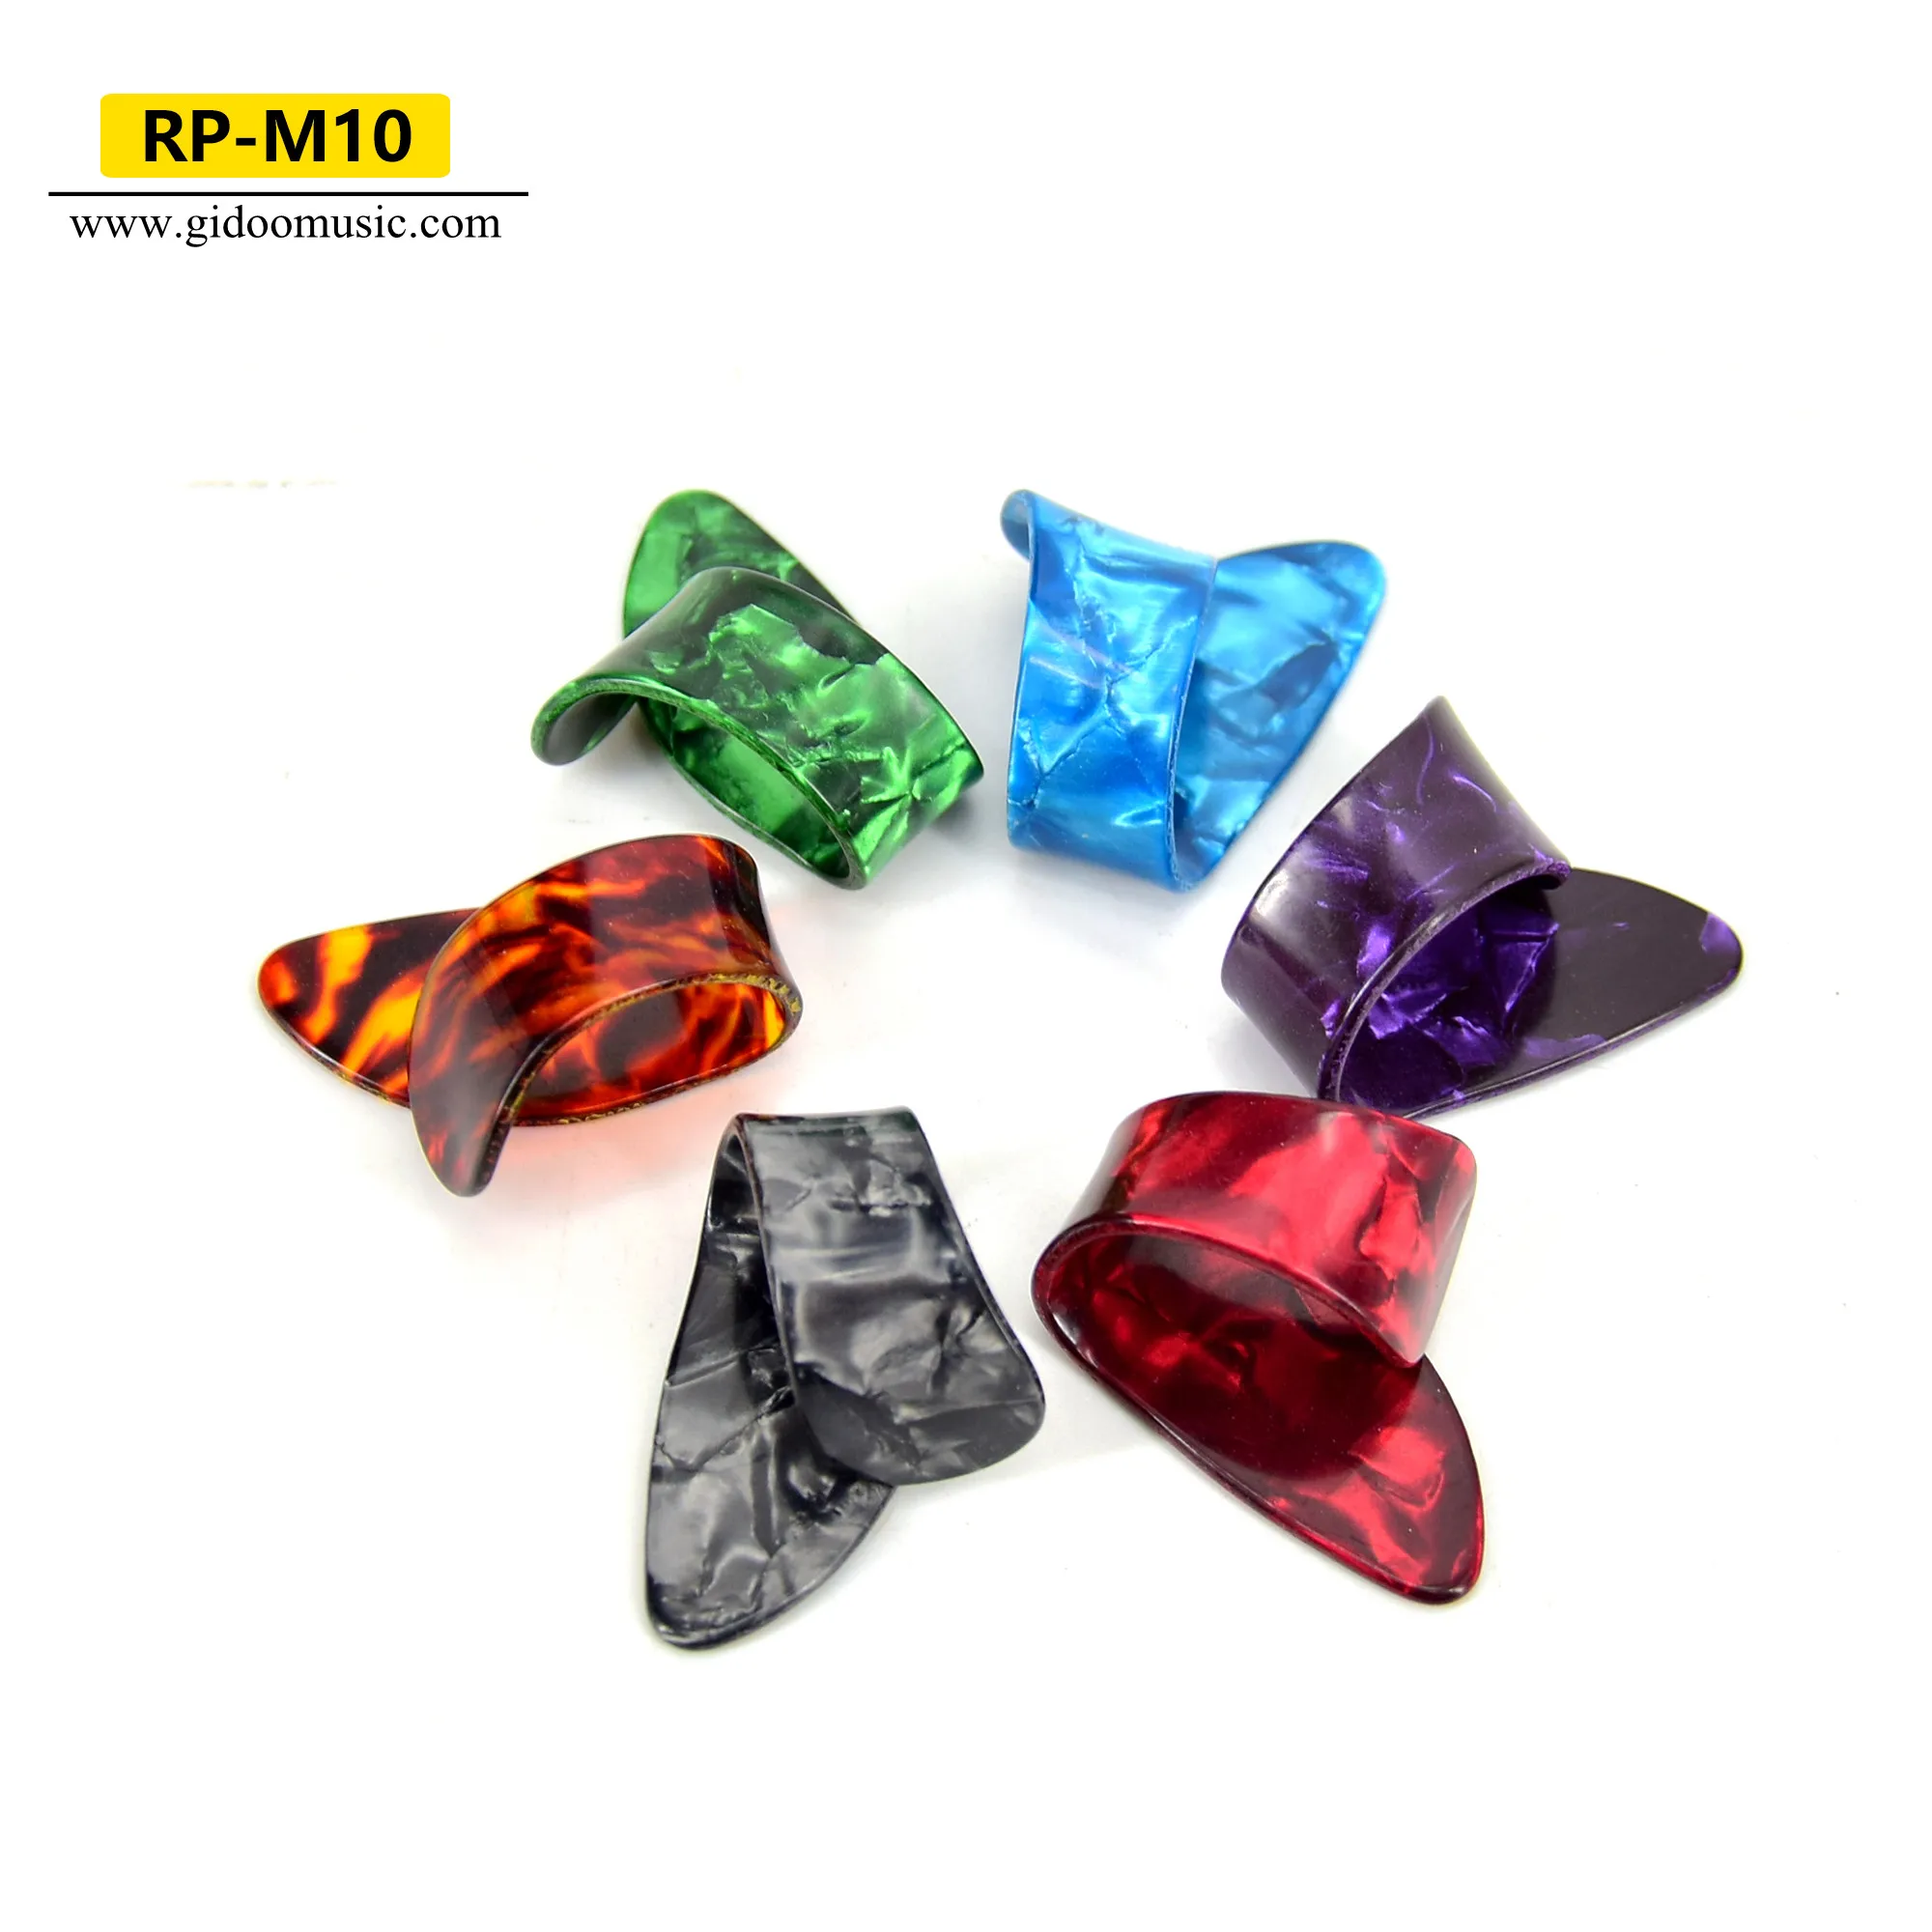 China Made Guitar Accessories Index Finger Pick For Instruments - Buy Pick Guitar,Custom Guitar Picks,Guitar Picks Product on